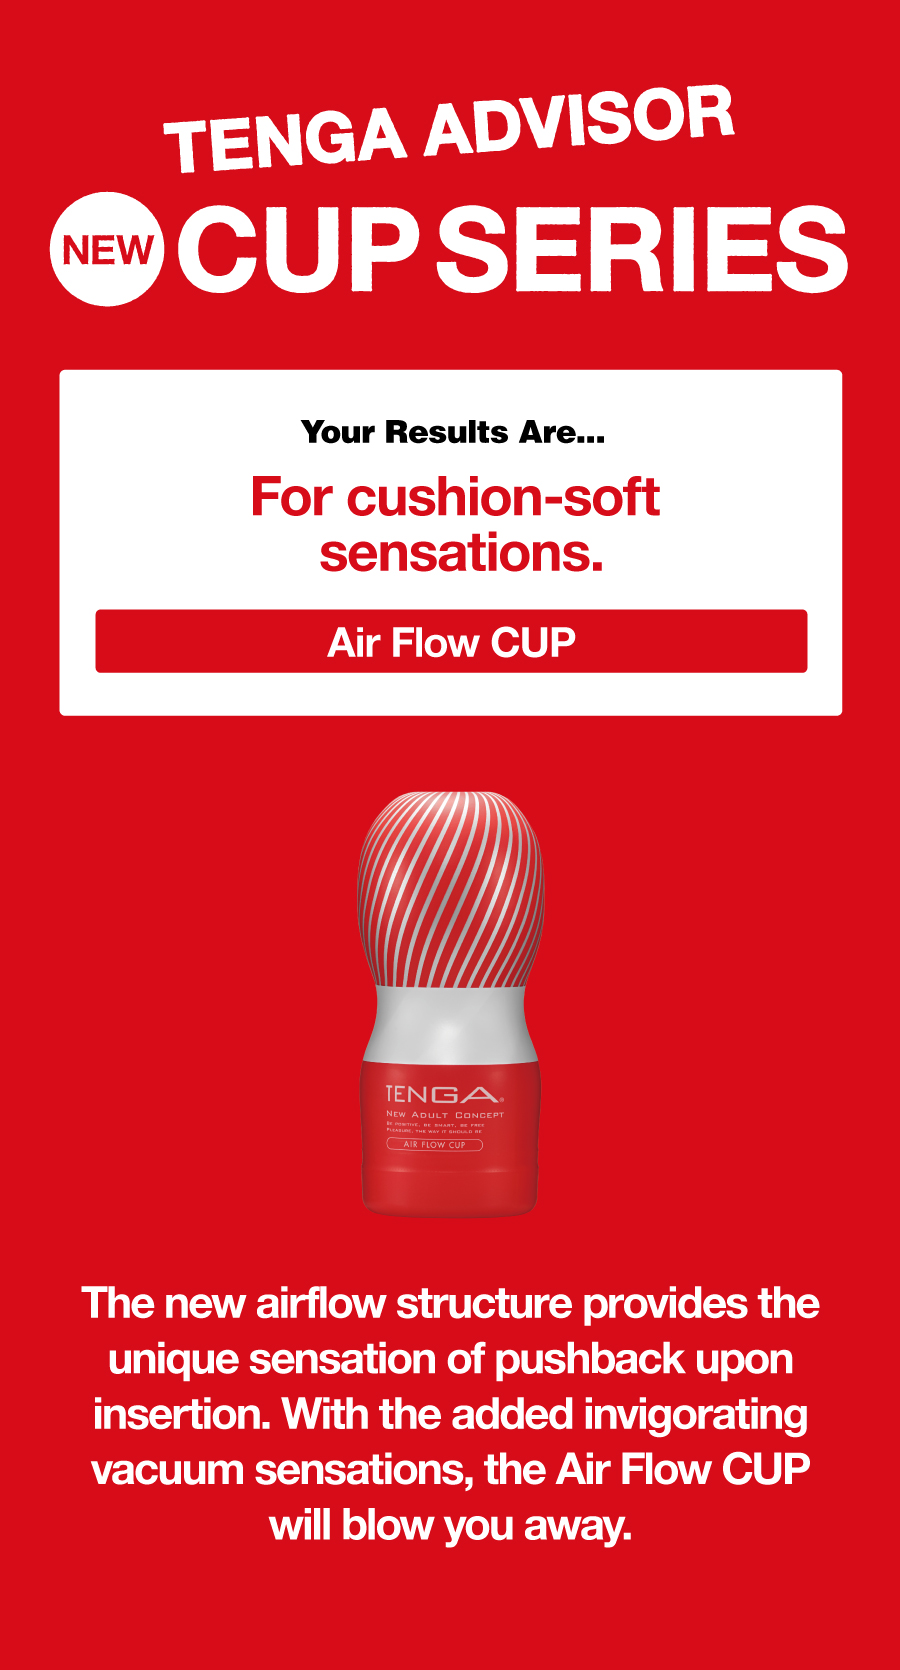 TENGA ADVISOR NEW CUP SERIES Your Results Are… For cushion-soft sensations. Air Flow CUP The new airflow structure provides the unique sensation of pushback upon insertion. With the added invigorating vacuum sensations, the Air Flow CUP will blow you away.